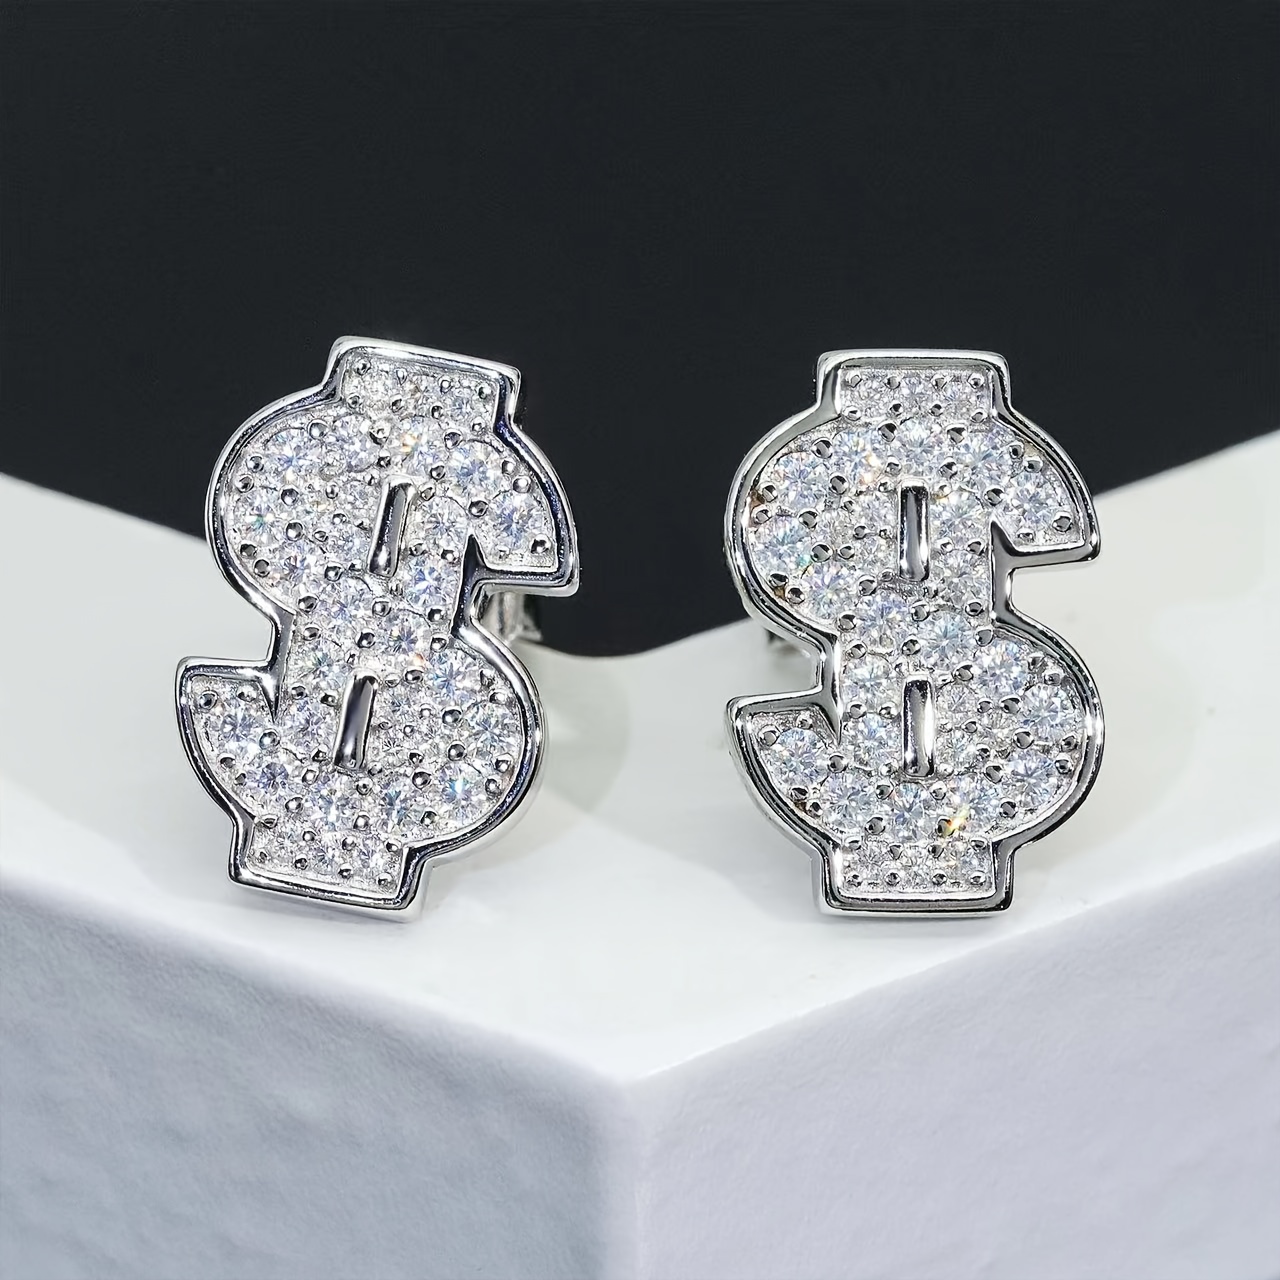 

2pcs S925 Silver Plated Set With 1 Carat Moissanite Hip Hop Personality Trend Wind Men And Women With The Same Style Earrings, Party Party Gift